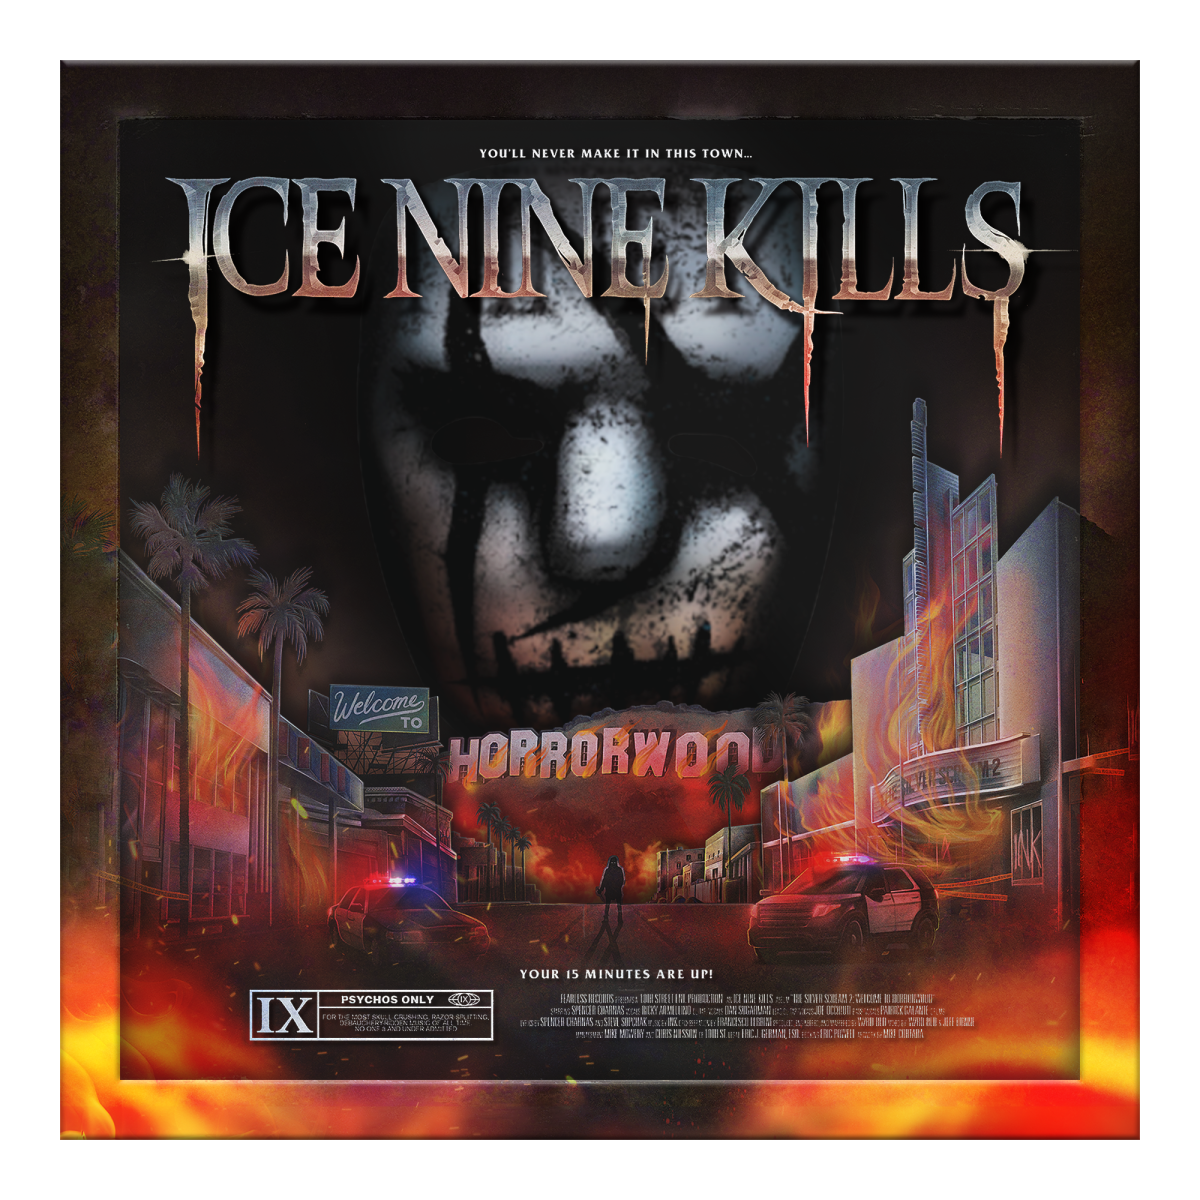 Ice Nine Kills 2023 The Silver Scream 2: Welcome to Horrorwood Under Fire Deluxe album. Courtesy: Fearless Records